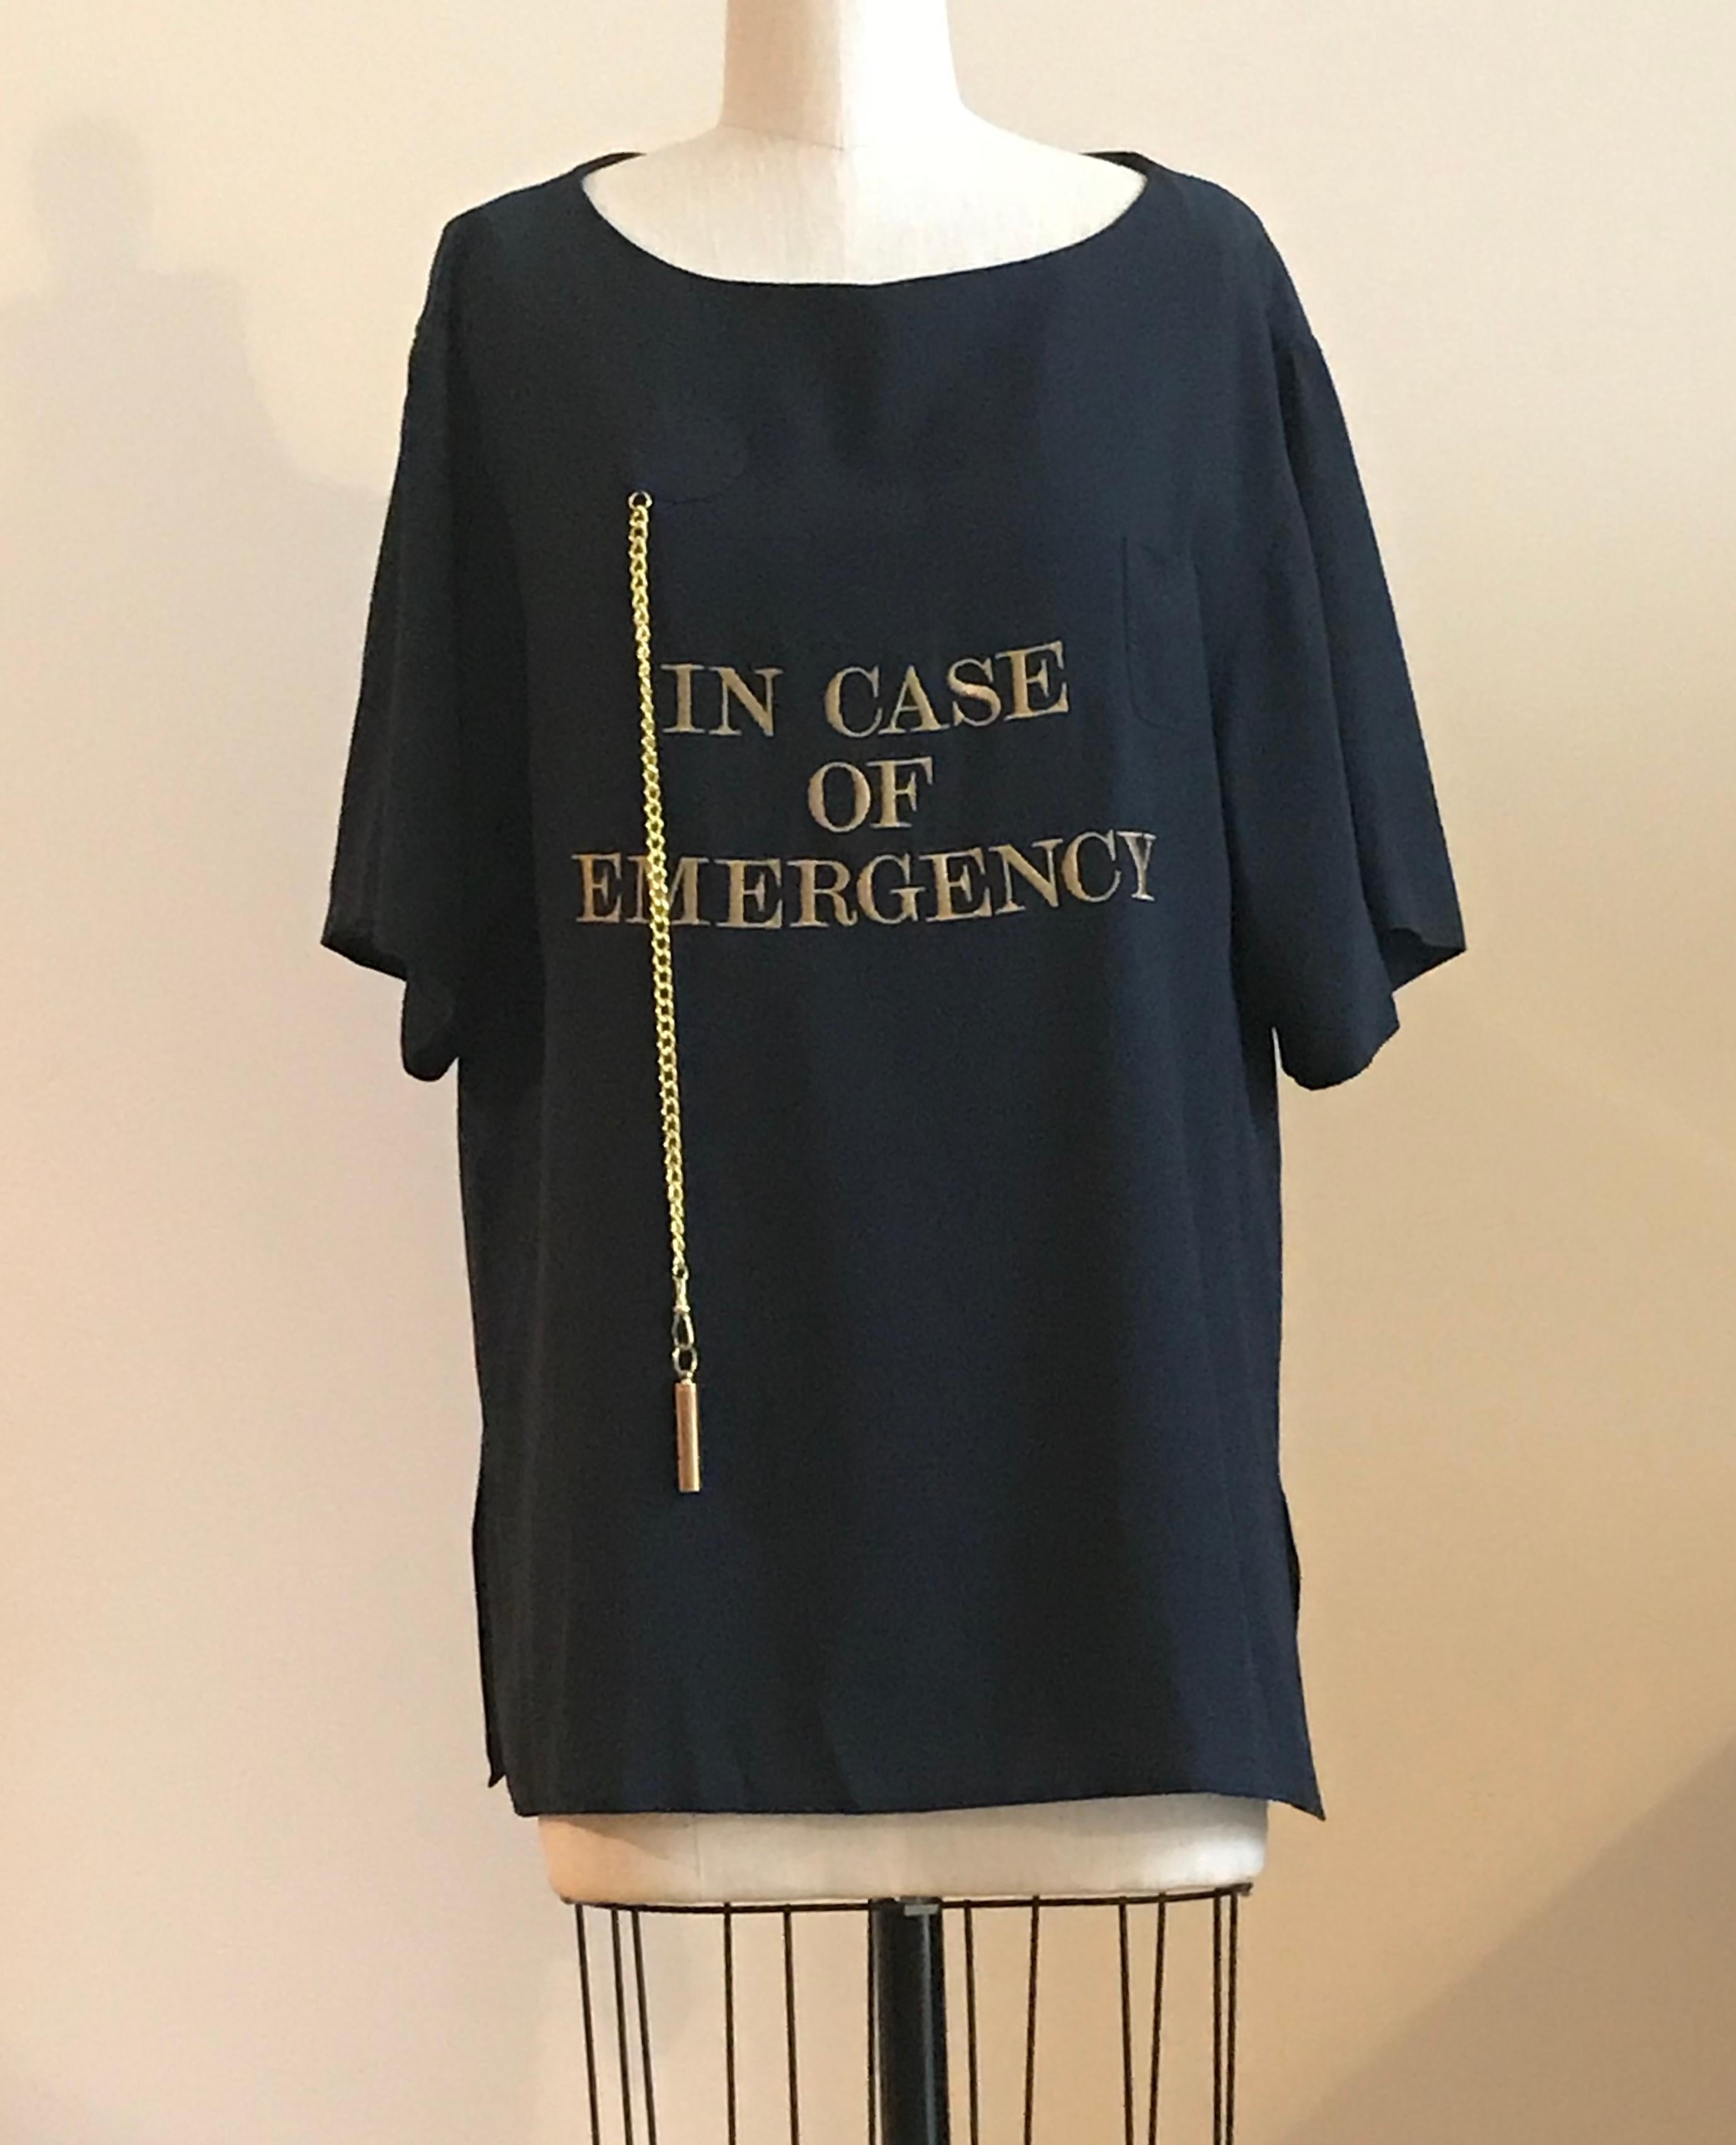 Moschino Couture late 1980s or early 1990s vintage navy blue oversized t-shirt cut top featuring In Case of Emergency in gold embroidery. A gold whistle (it works!)  dangles from a chain on one side, and can be tucked into a tiny pocket at the